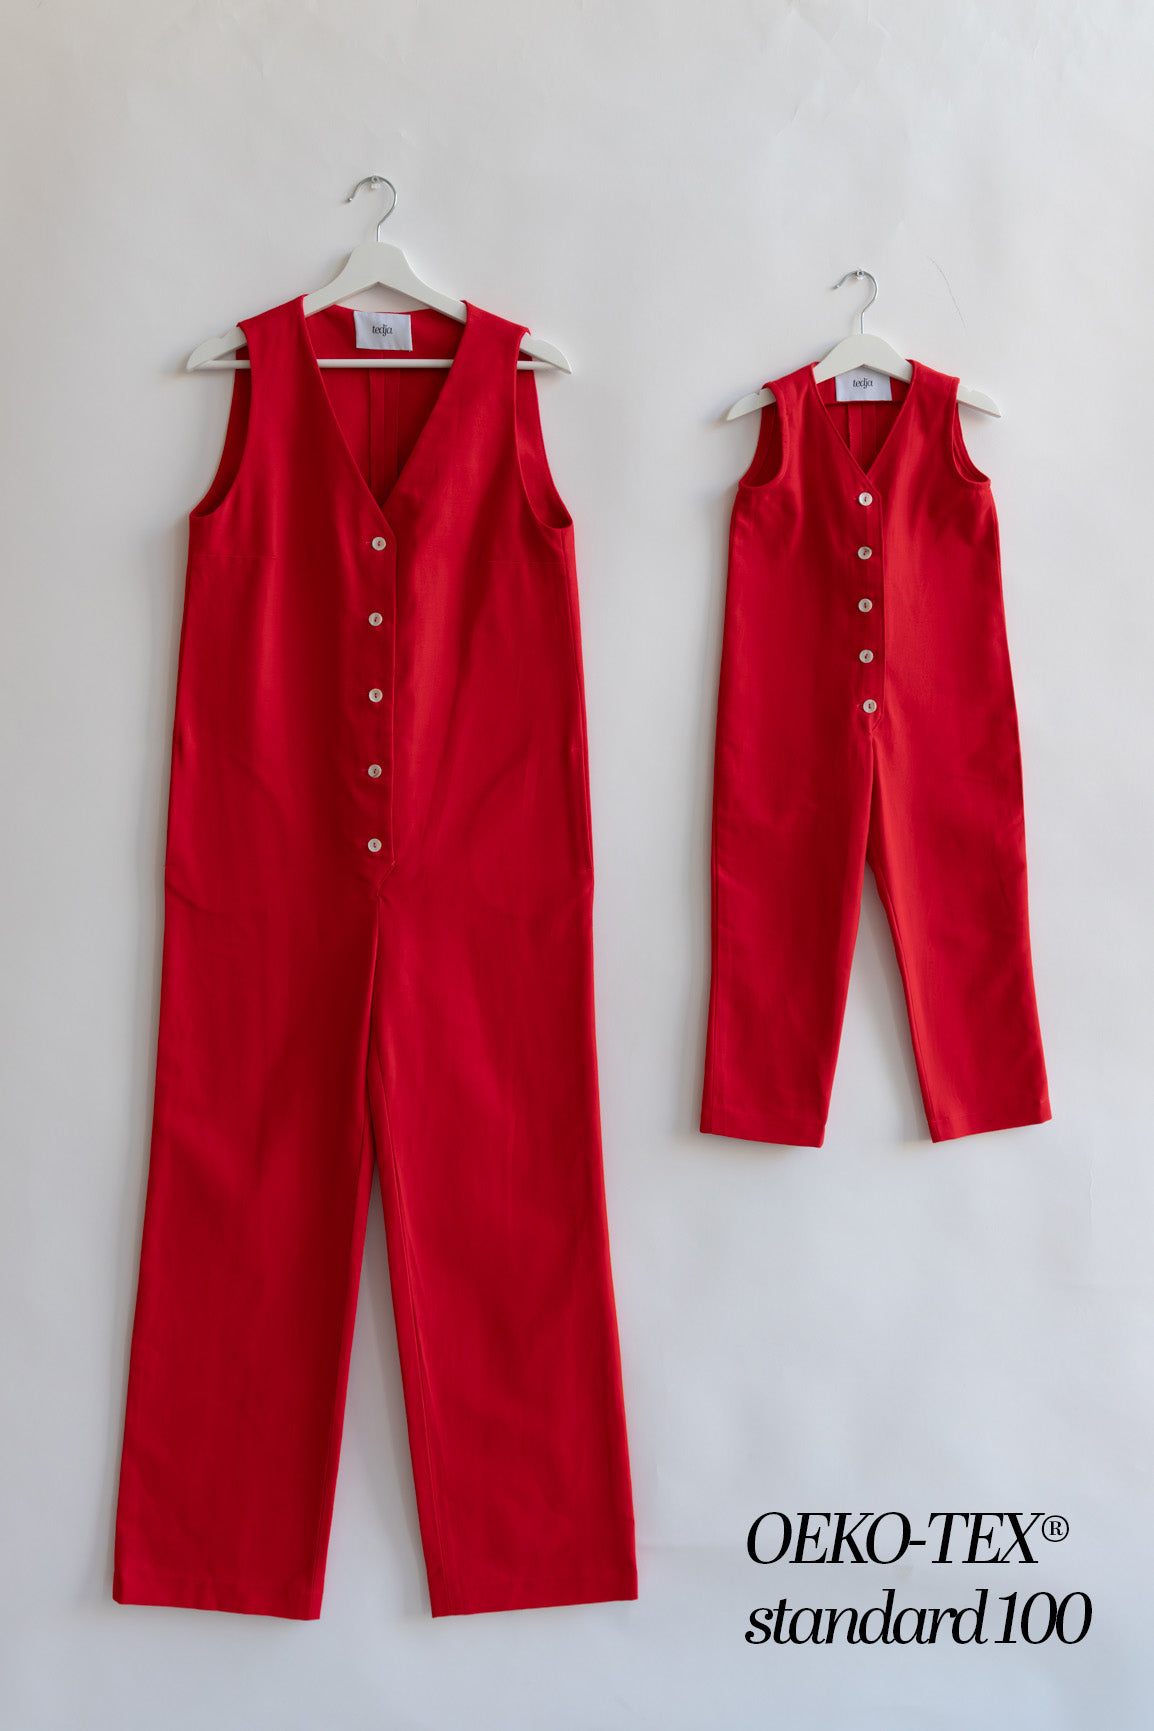 red color Kids Mini Jumpsuit overall workwear cotton canvas 5 buttons v-neck OEKO-TEX sustainable clothes handmade